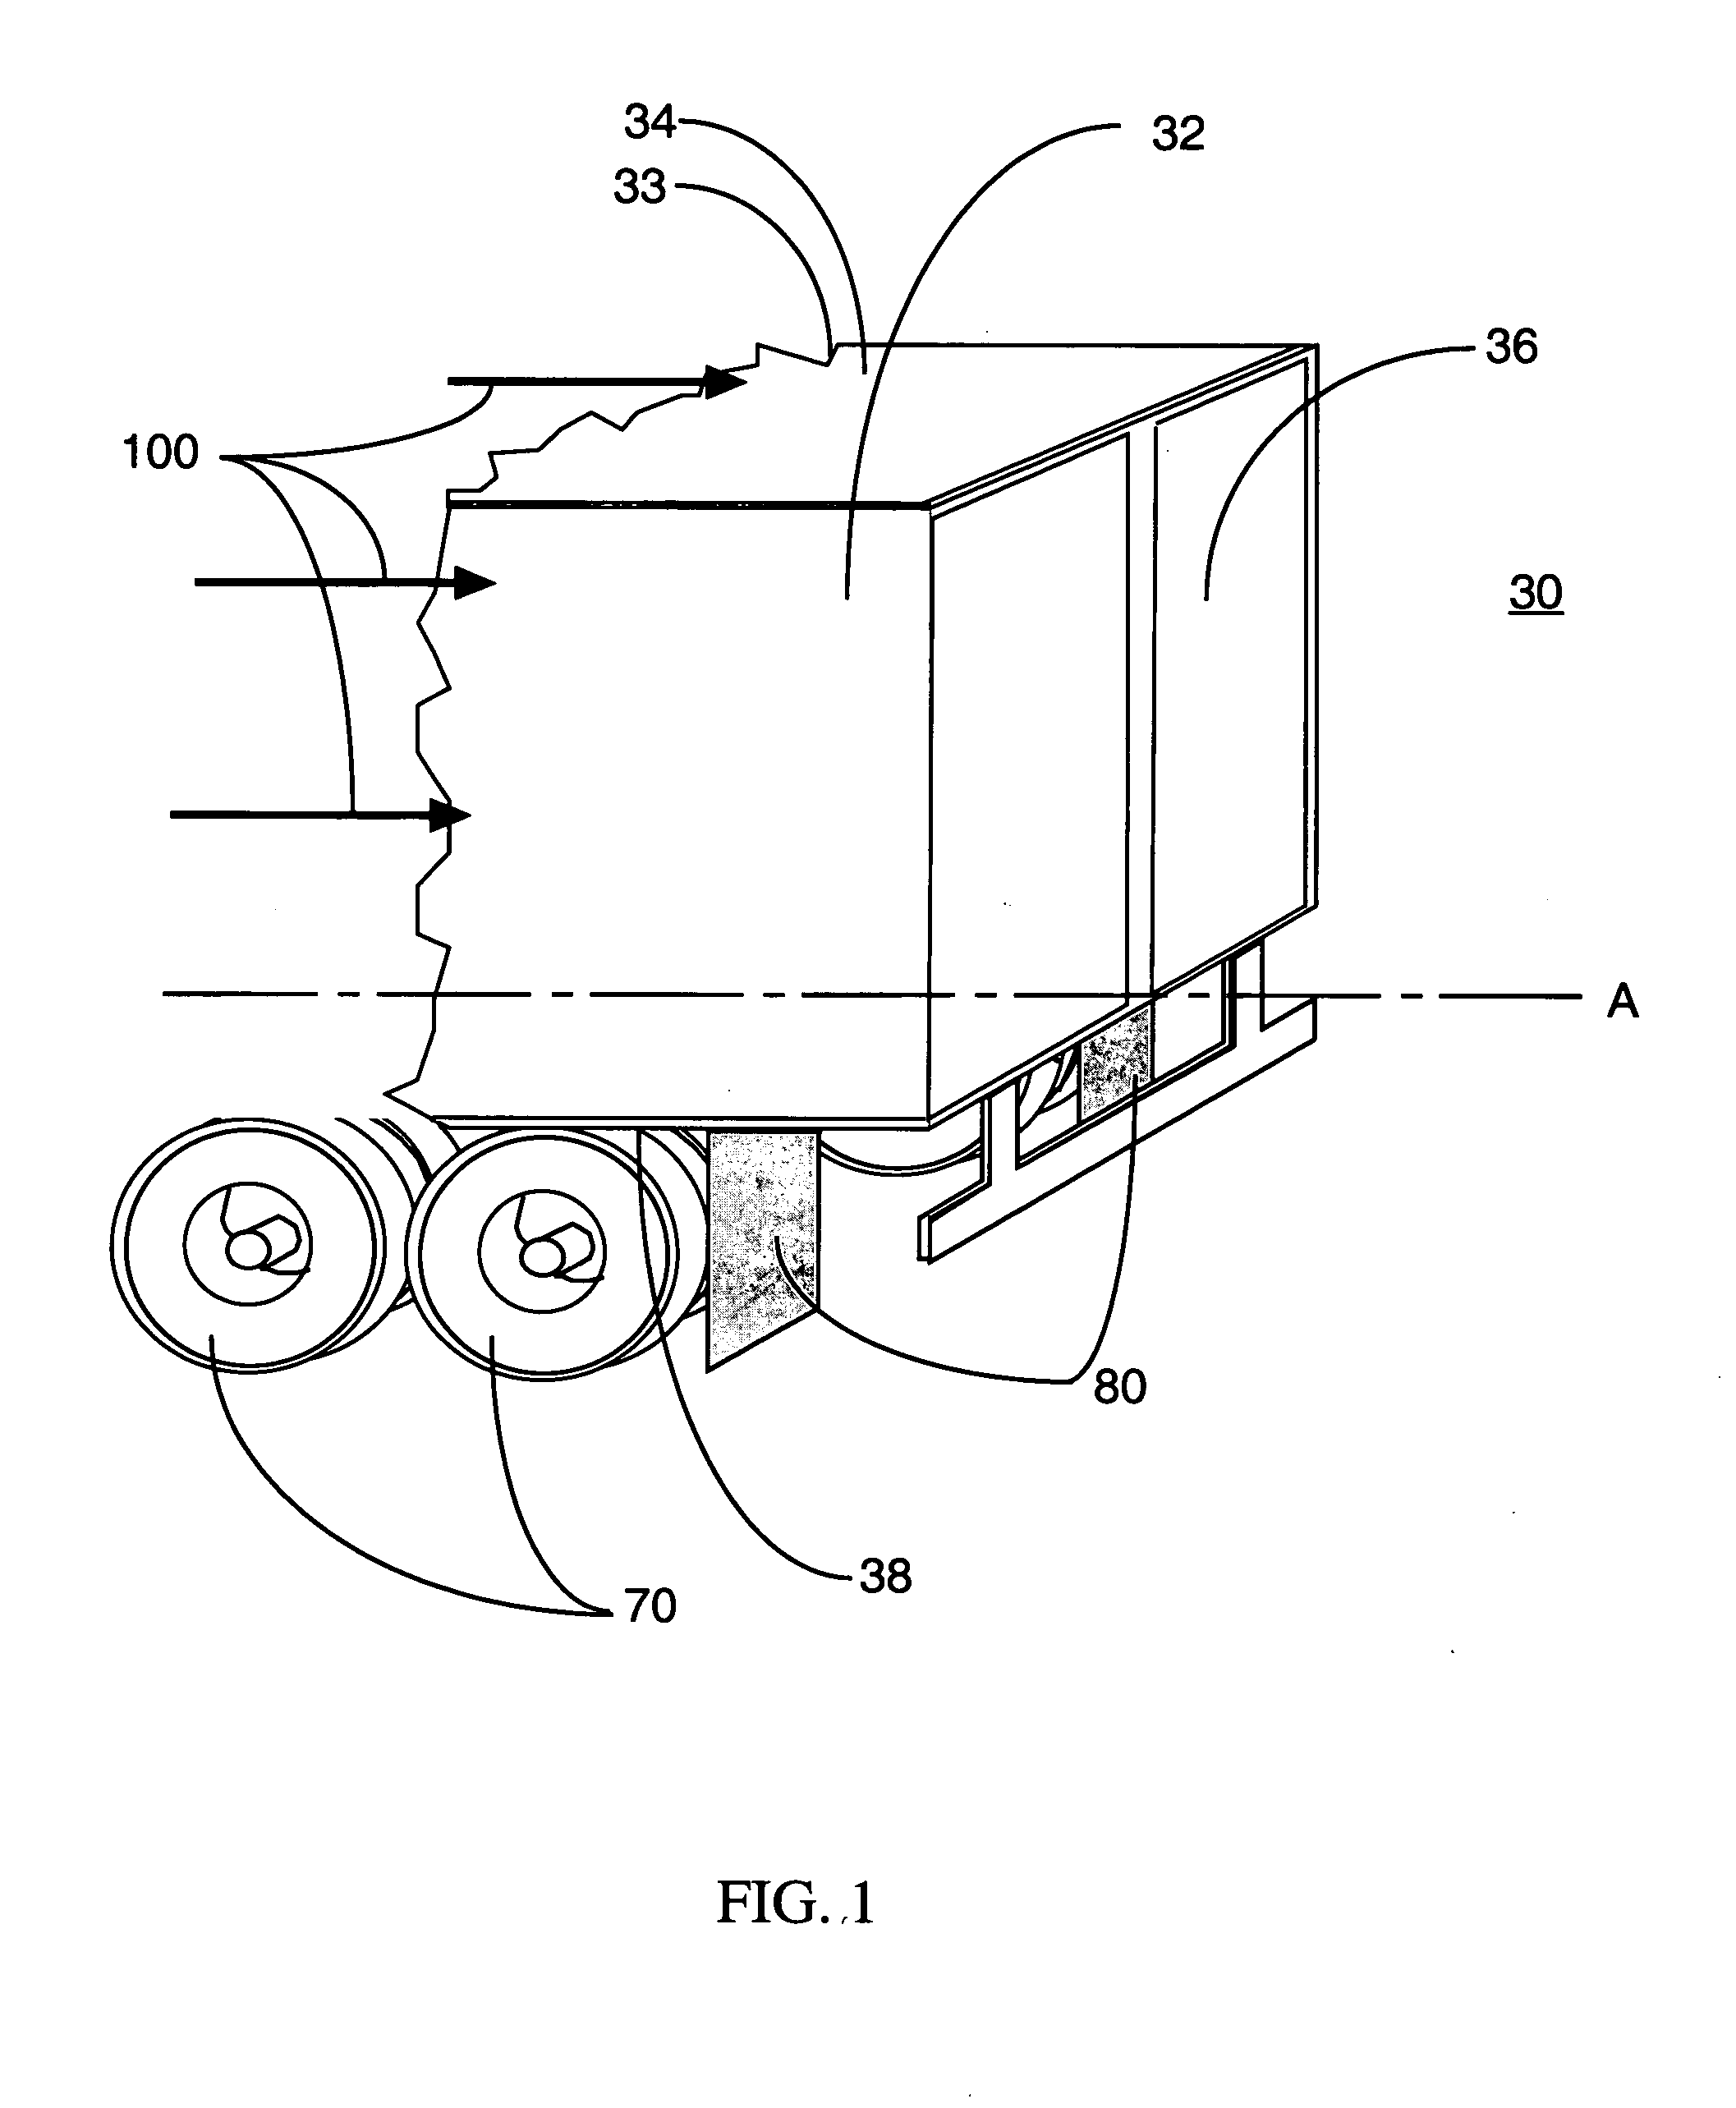 Undercarriage flow control device and method for reducing the aerodynamic drag of ground vehicles